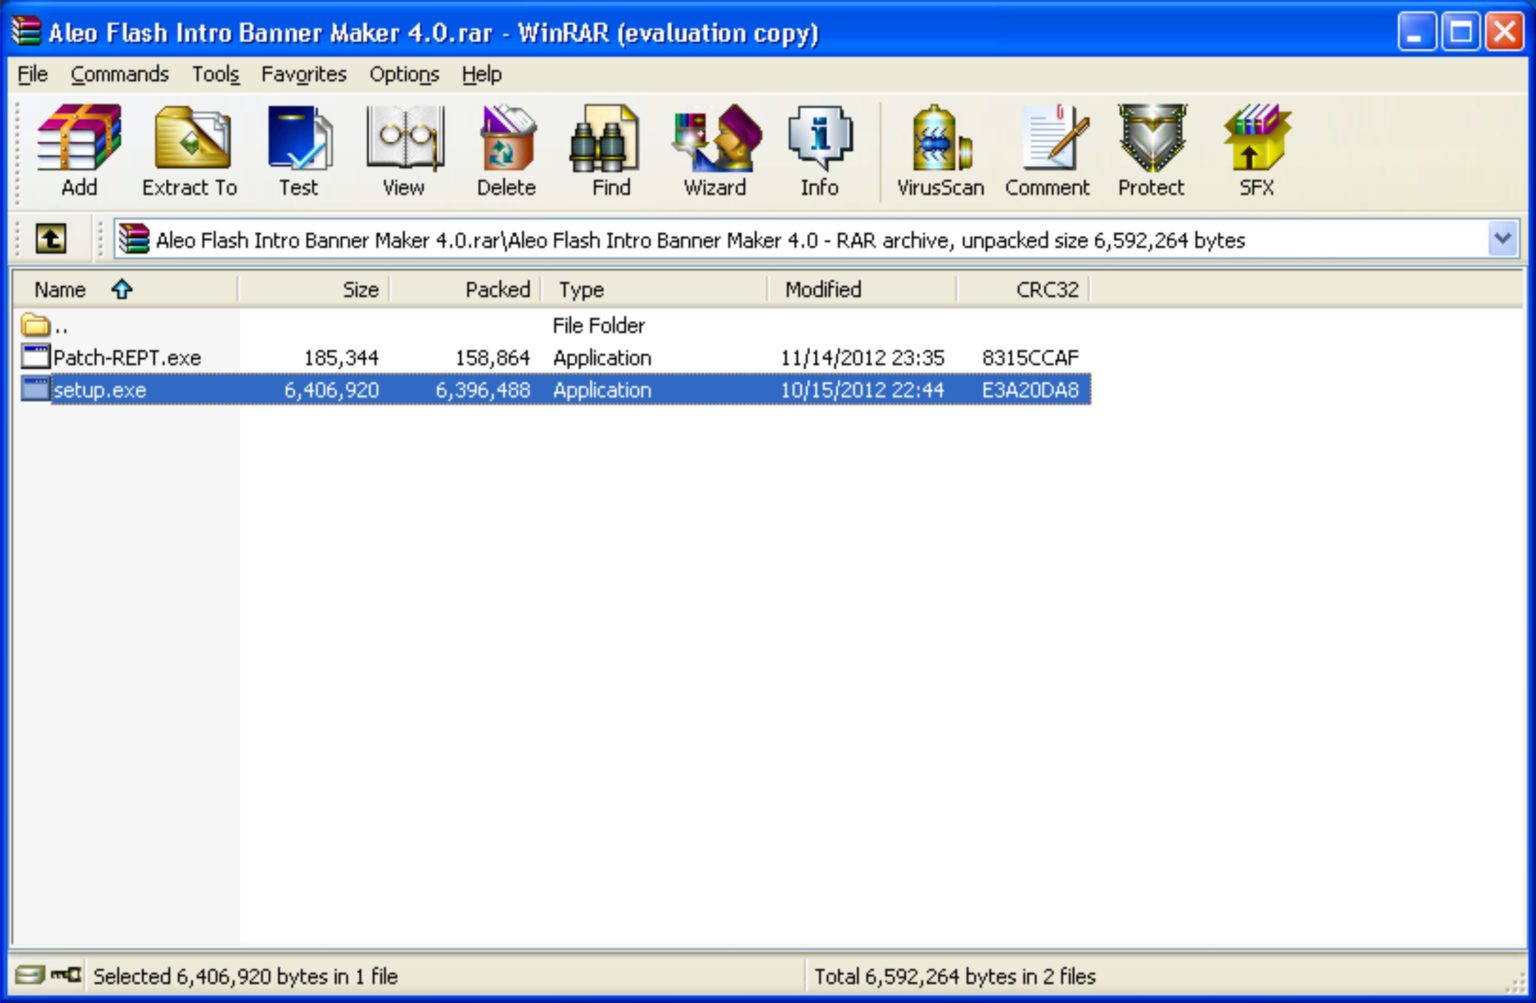 Download winrar 64 for windows 8.1